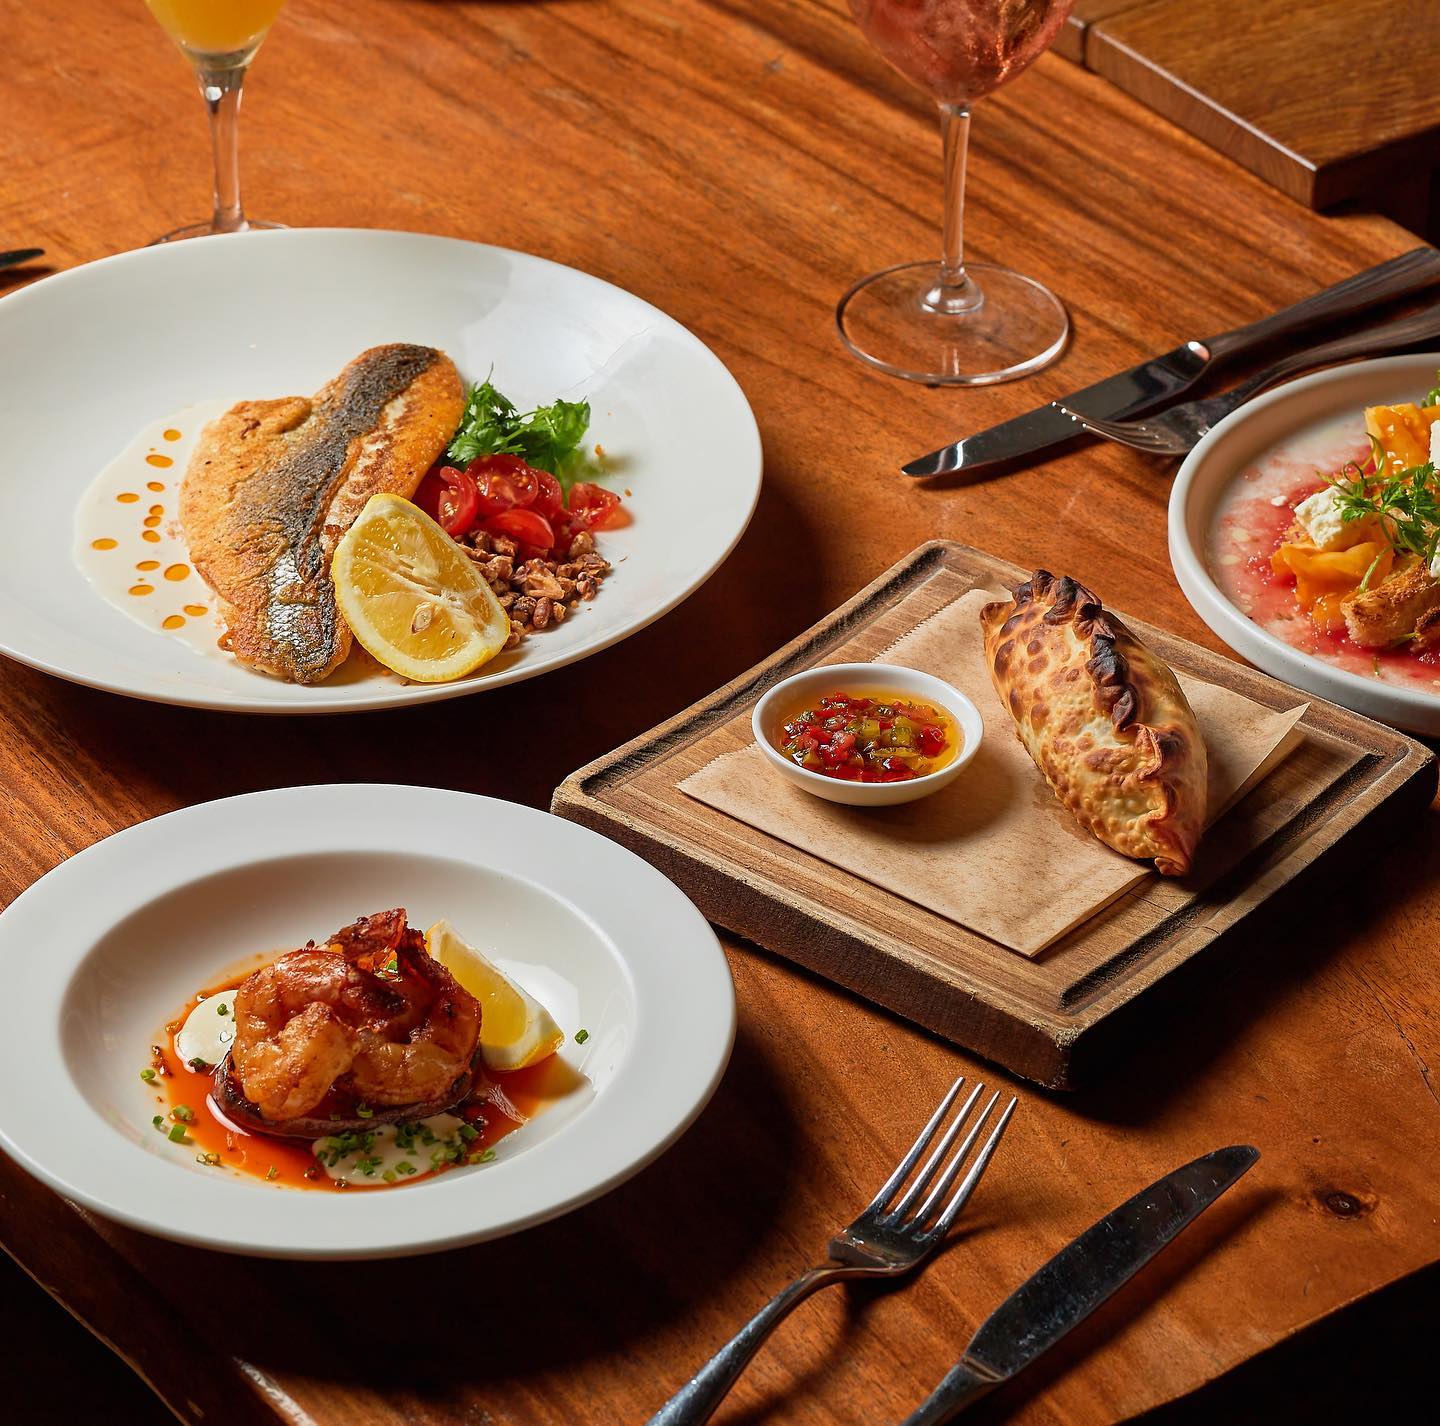 Savor the flavors with our $30 three-course ‘Lunch on the fly’ @quinto.miami🍽️ Quick, delicious, and different every day! Catch this lunchtime delight Mon-Fri, 12-3 pm. #LunchOnTheFly